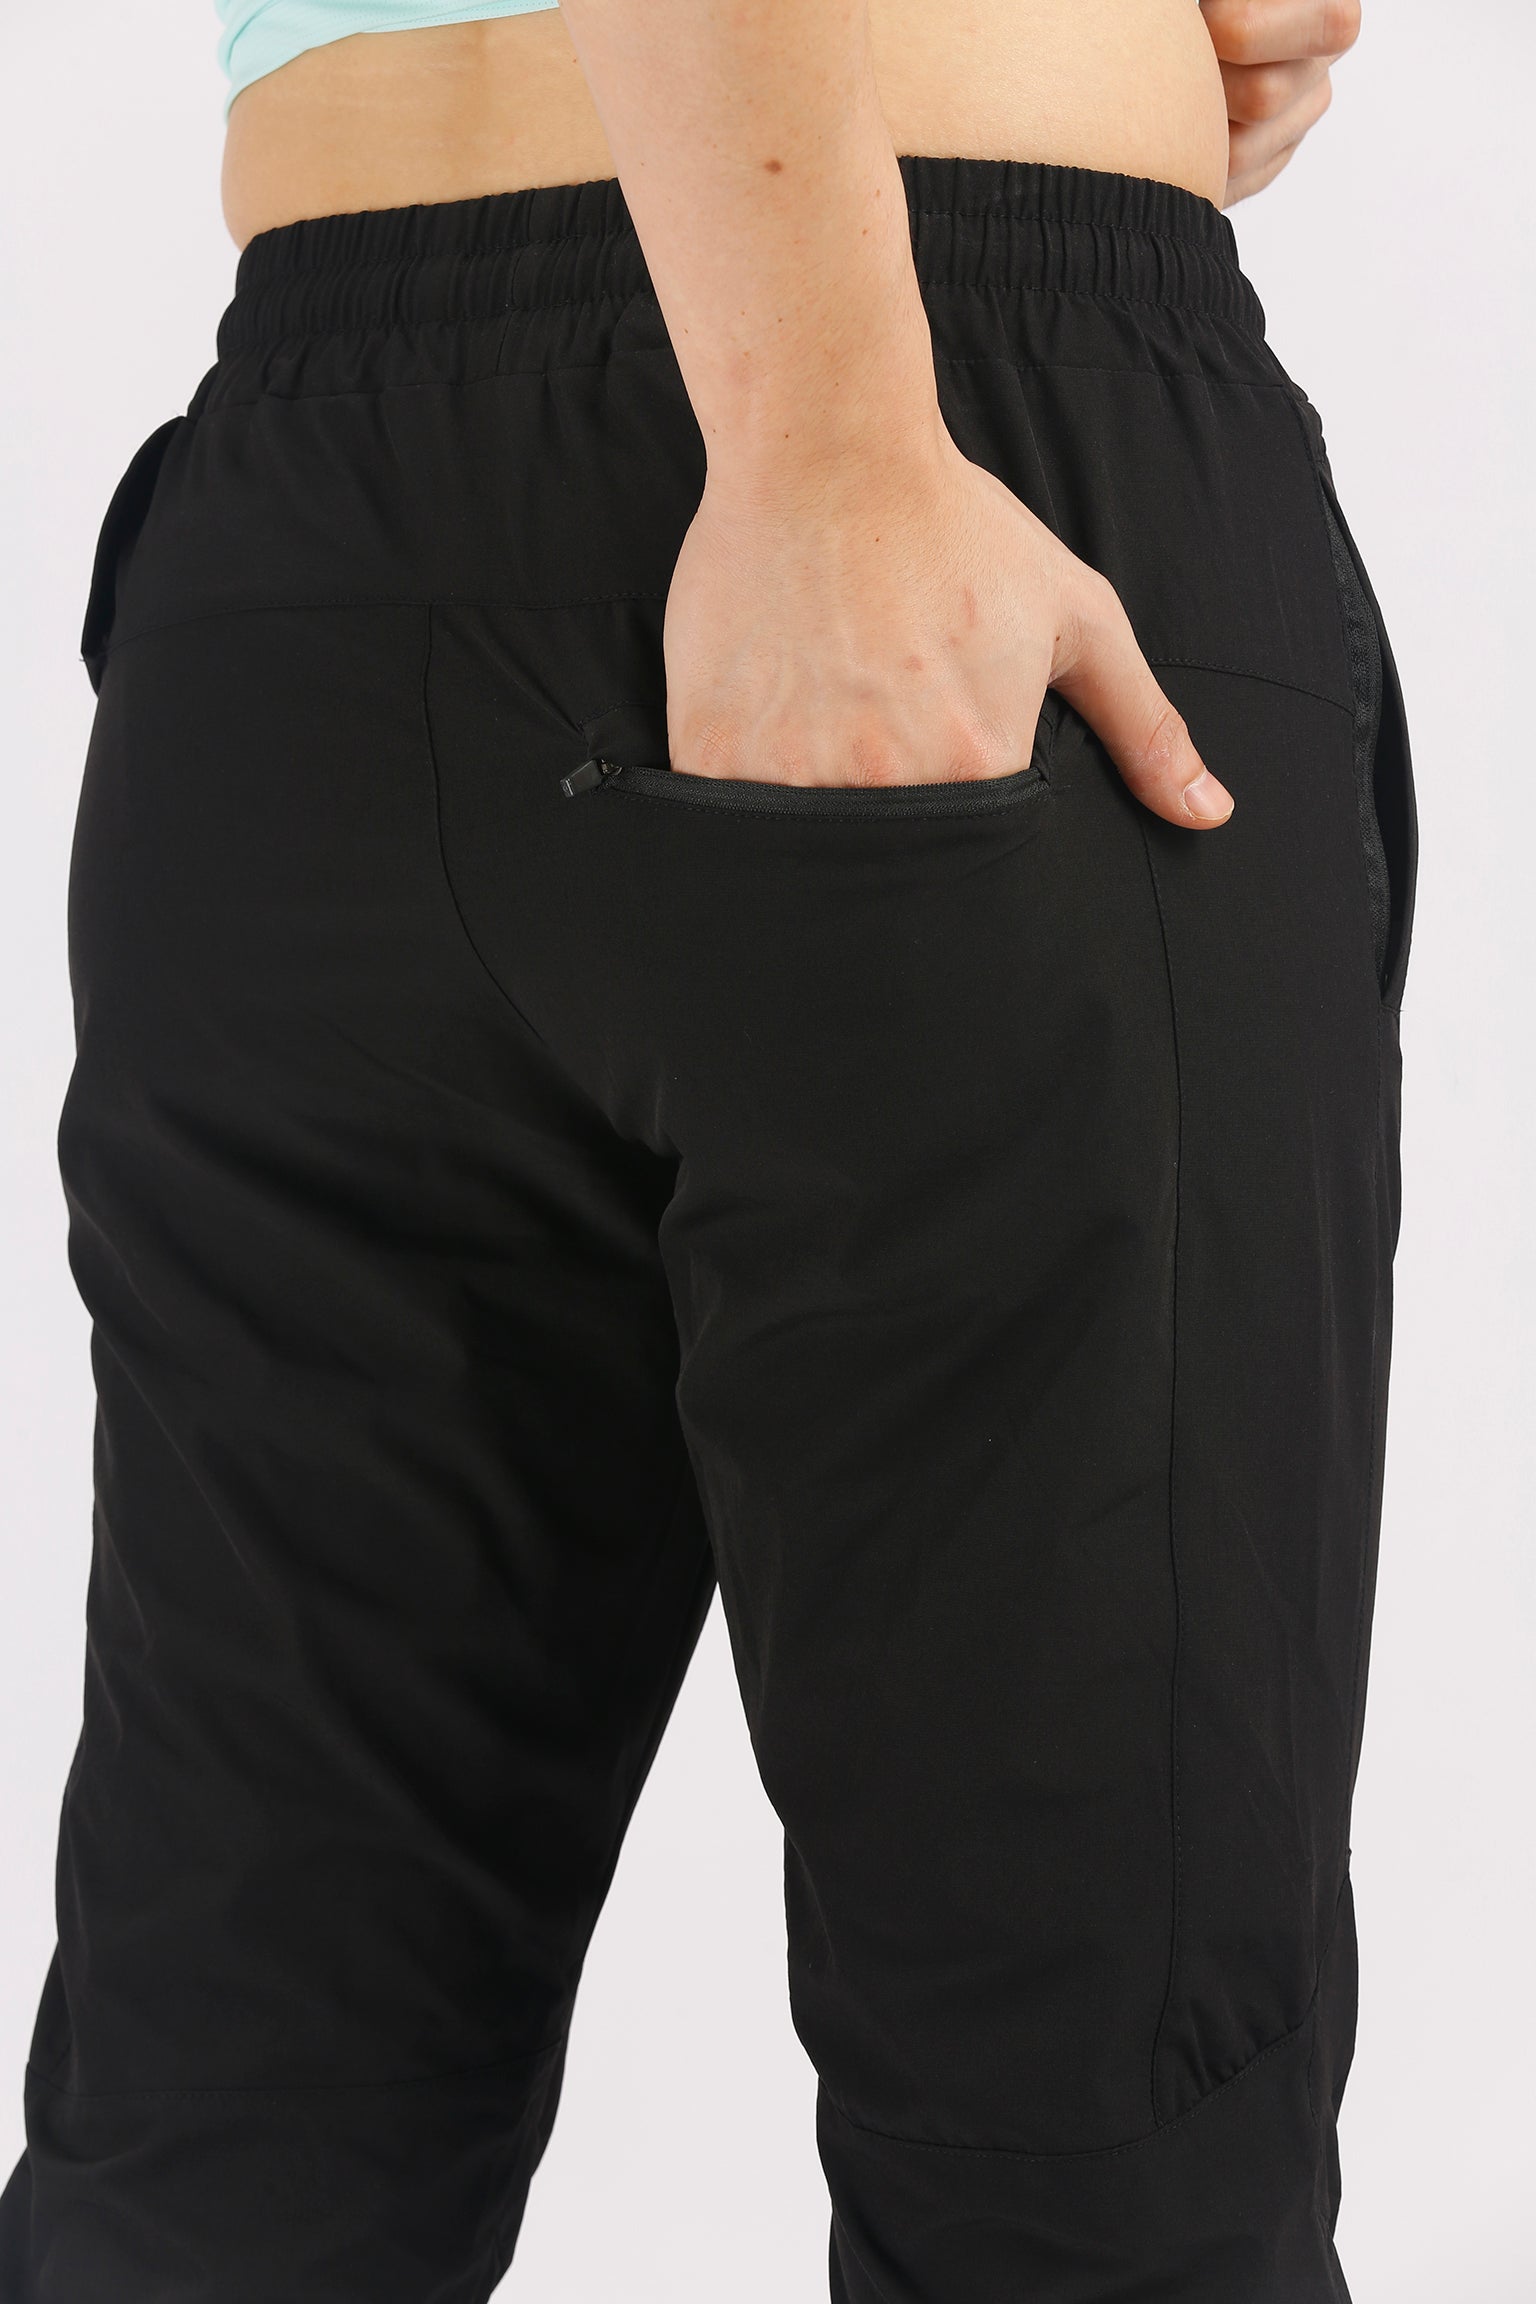 Musculo Slim fit Joggers 2023